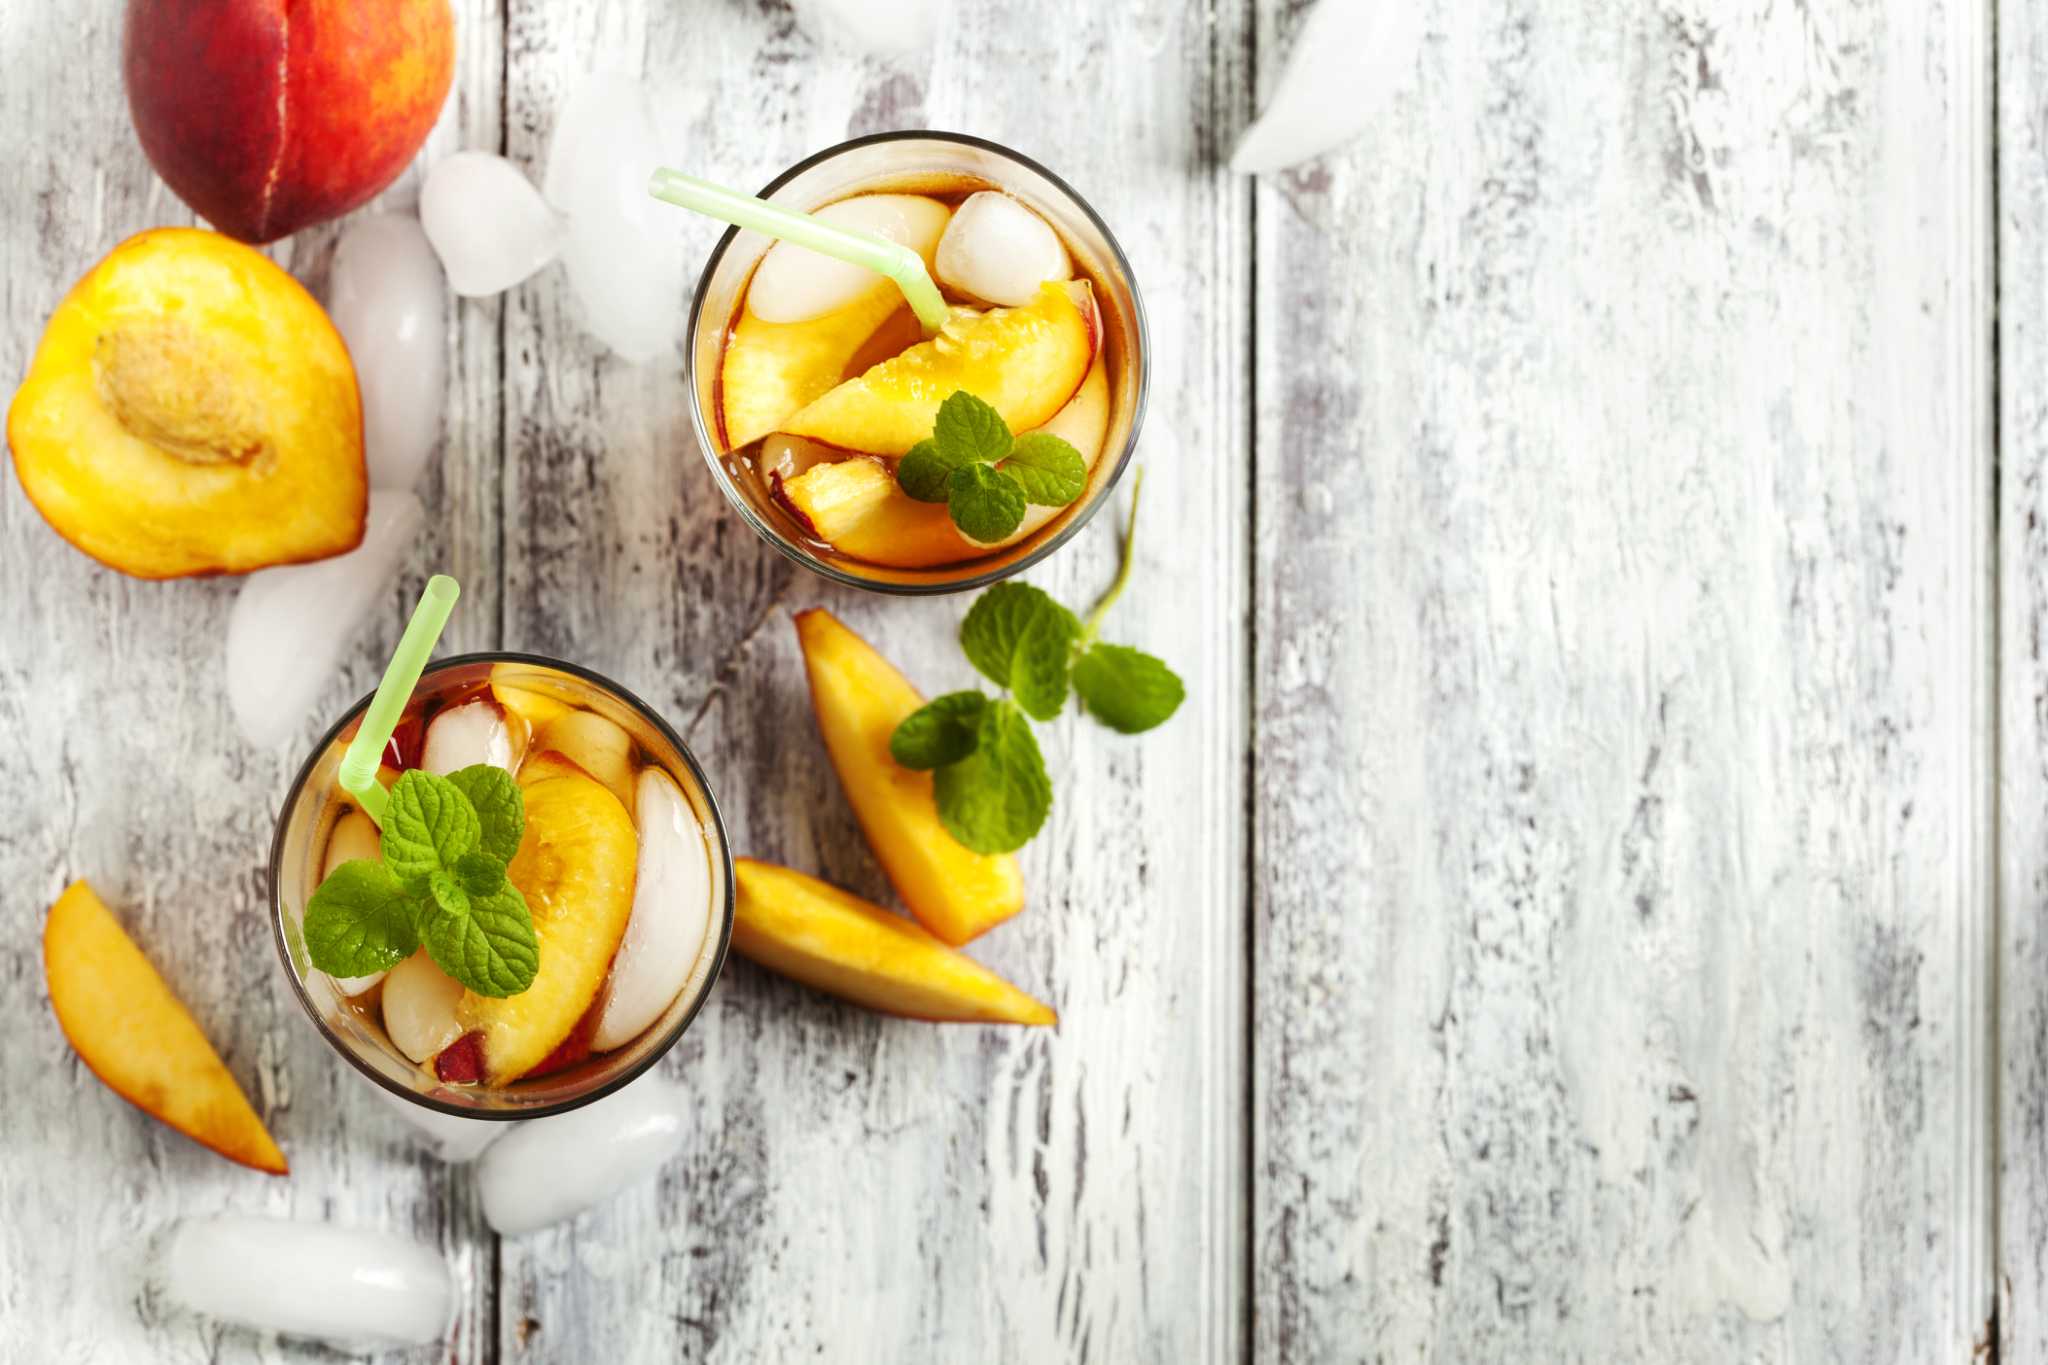 The Benefits of Home-Brewed Iced Tea: Cost, Calories, and Health